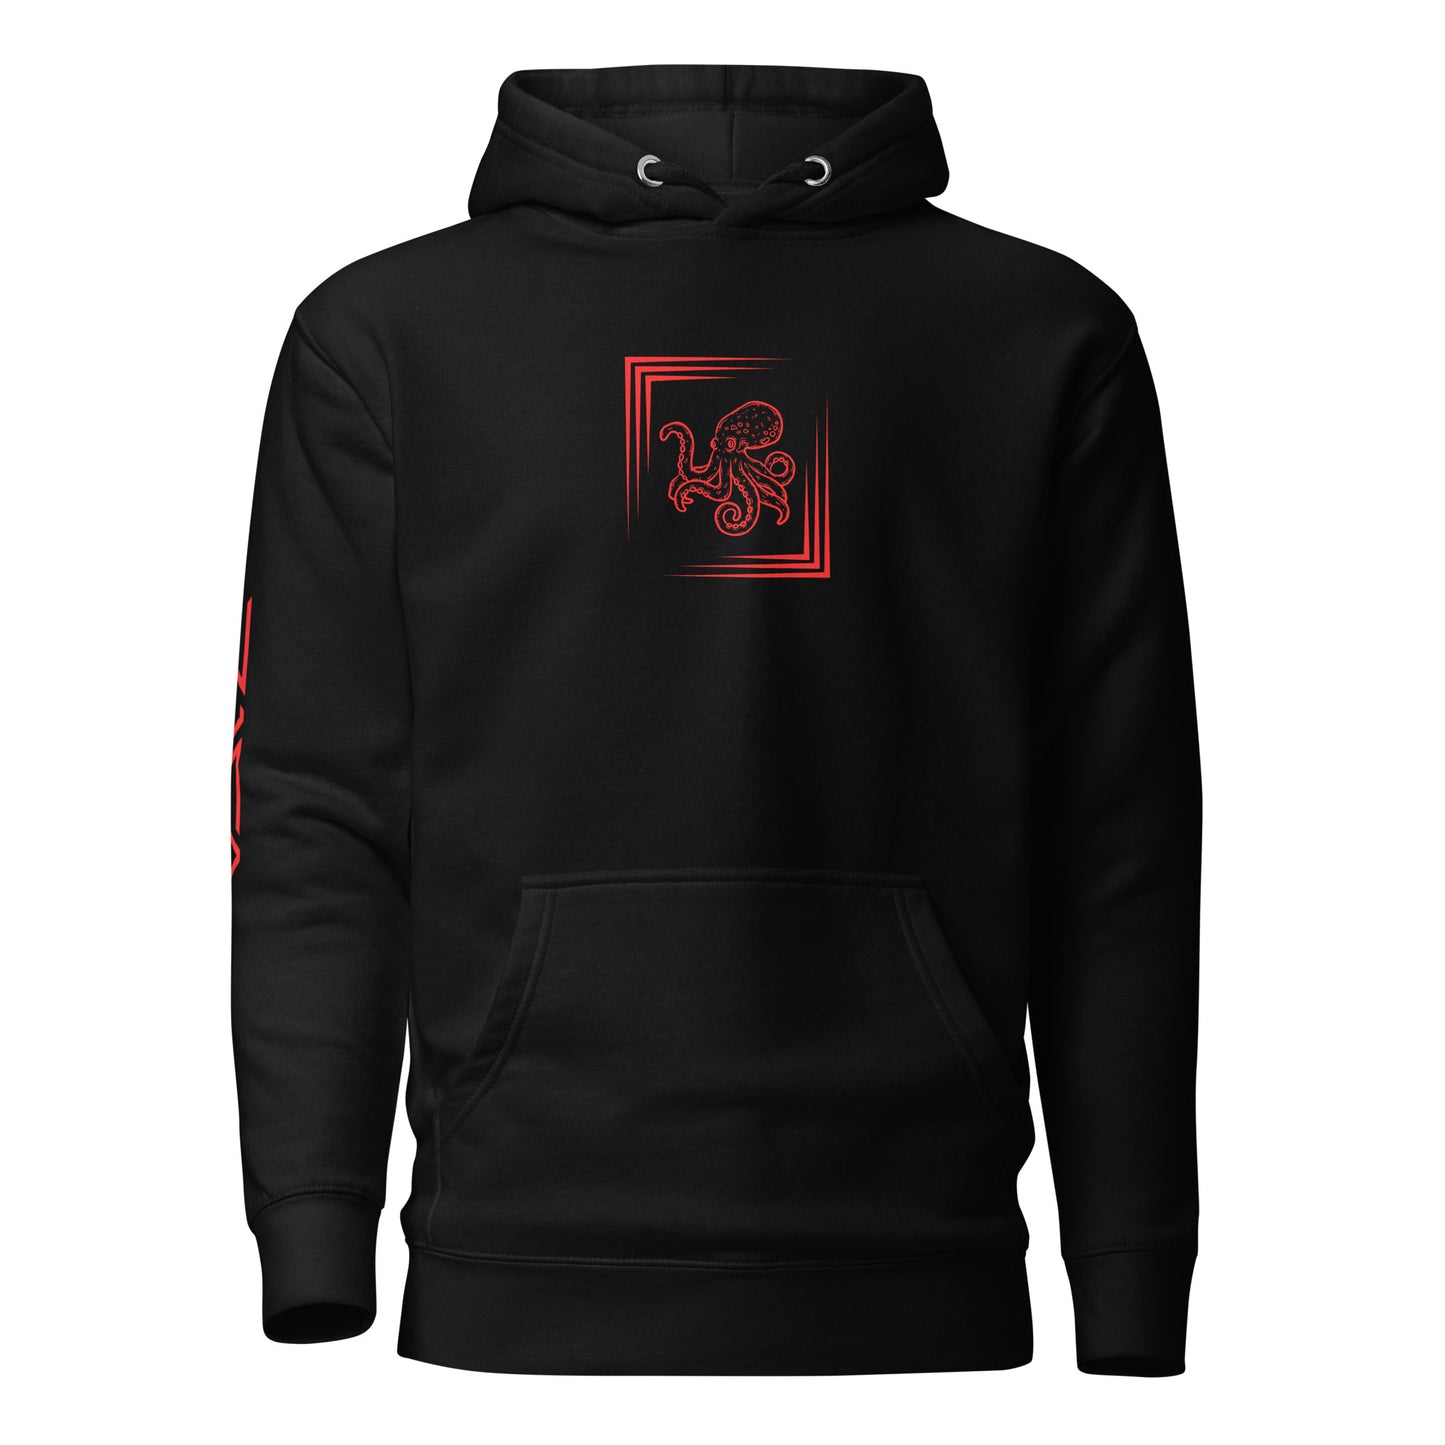 VYCE Octo Hoodie